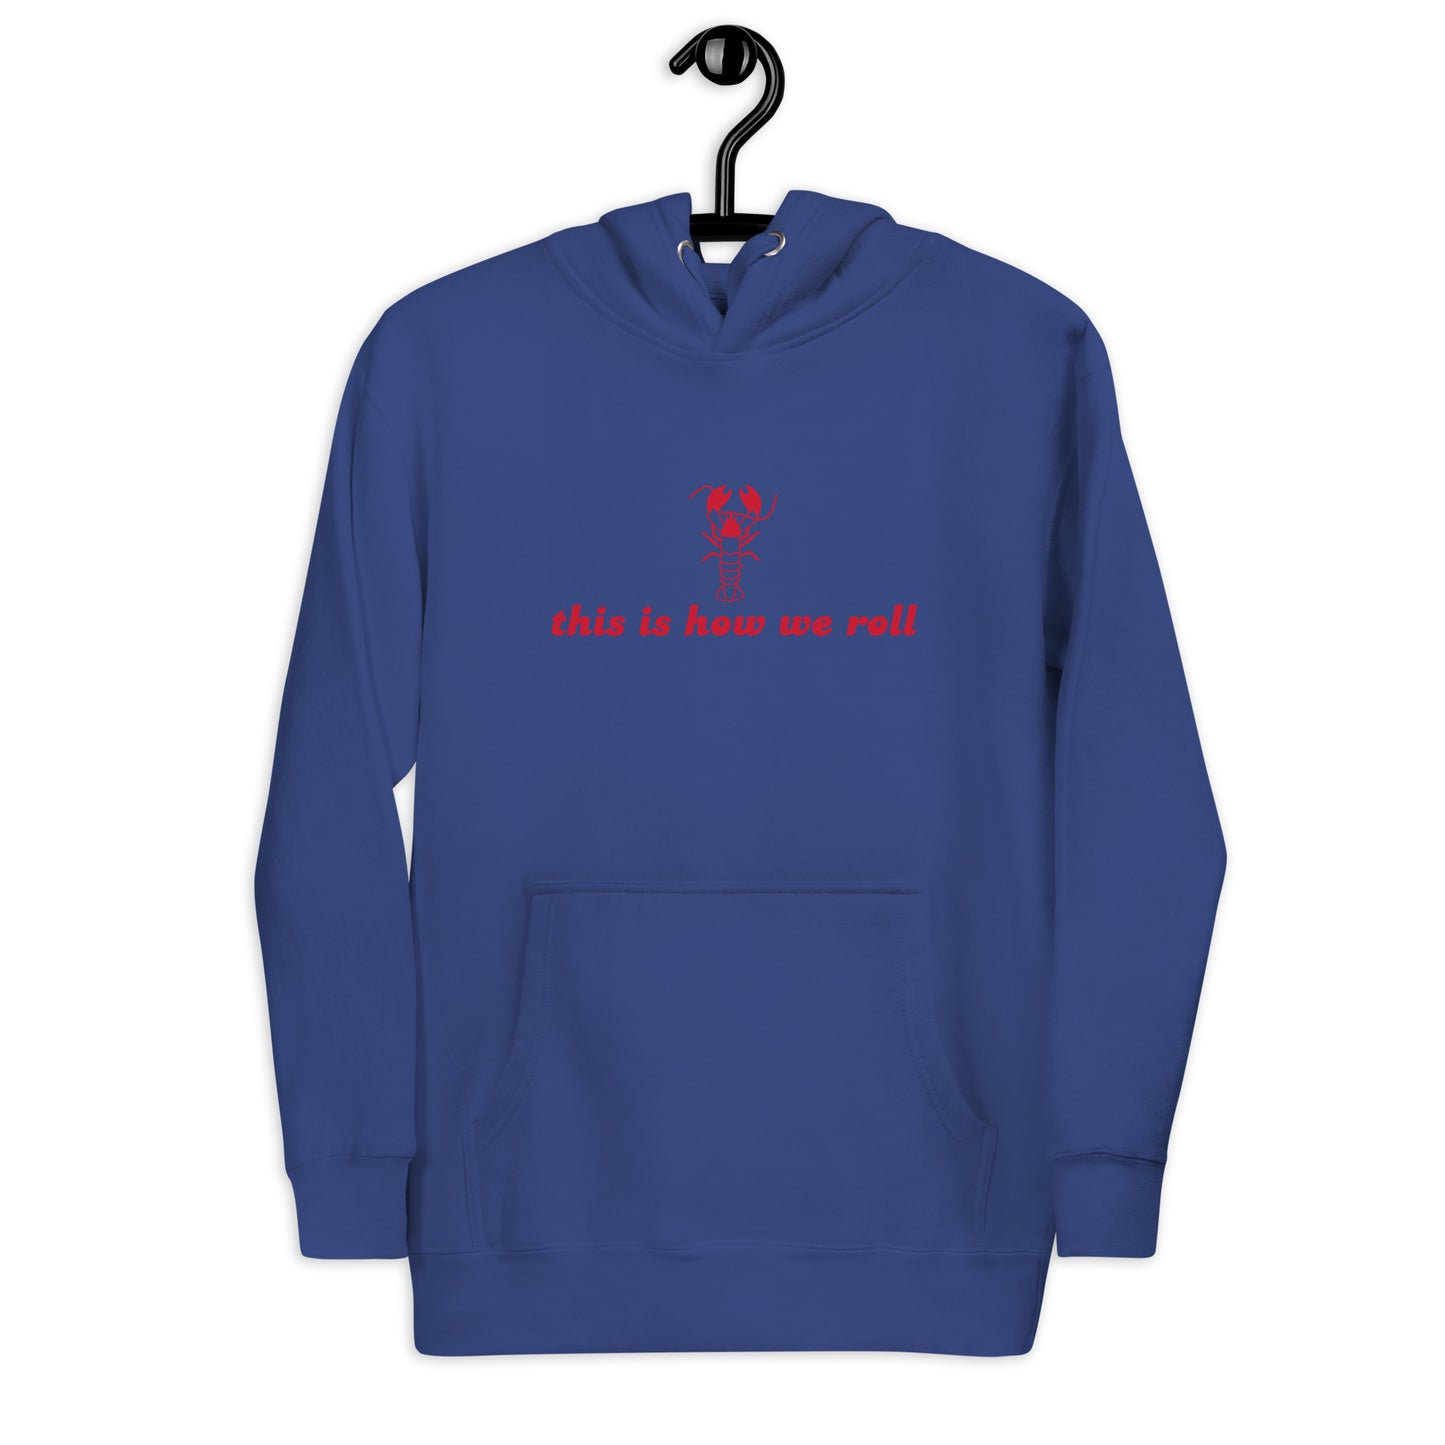 royal blue hoodie that says "this is how we roll" in red lettering with red lobster graphic